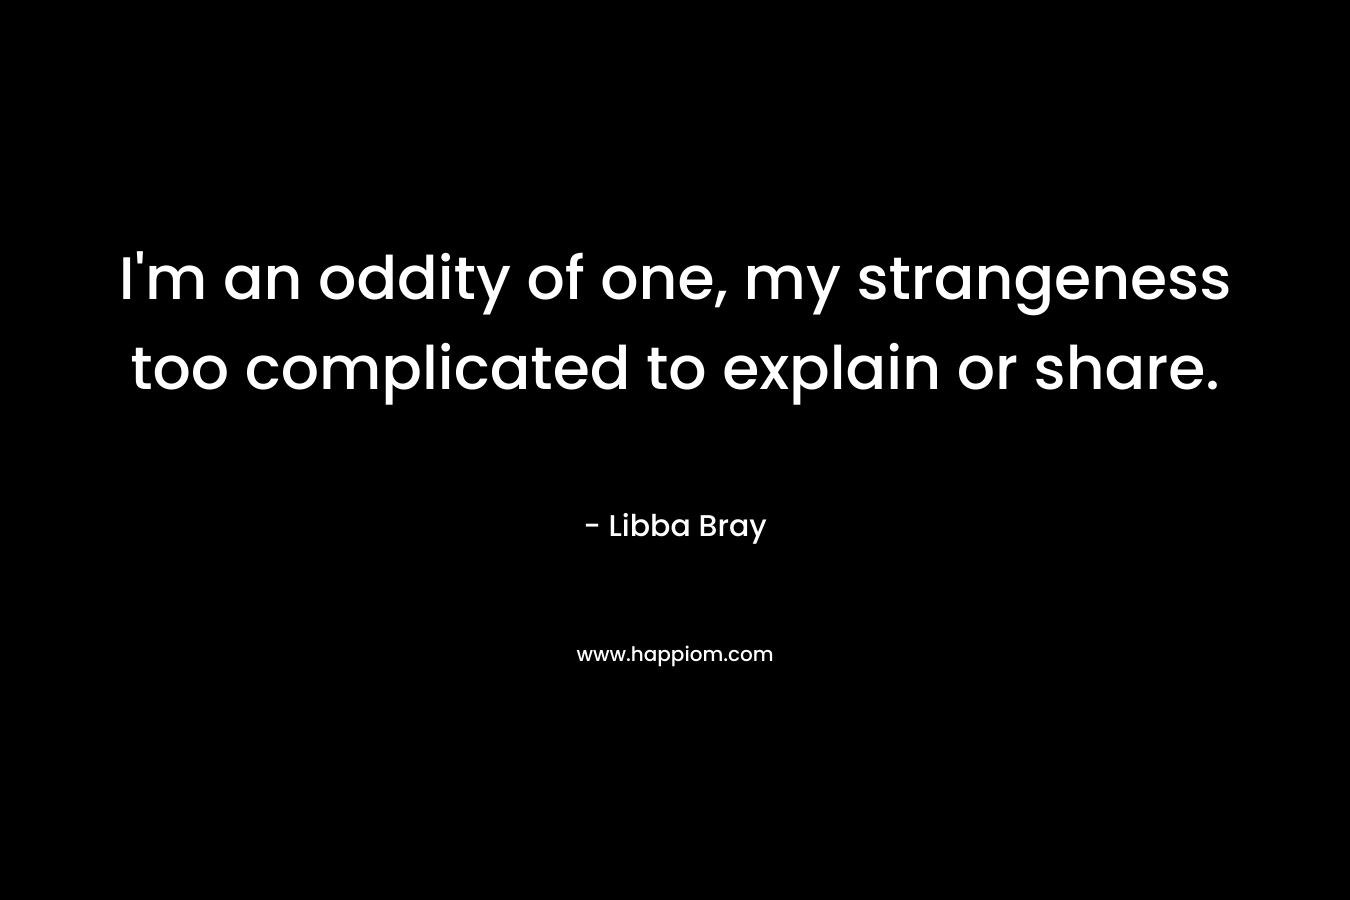 I’m an oddity of one, my strangeness too complicated to explain or share. – Libba Bray